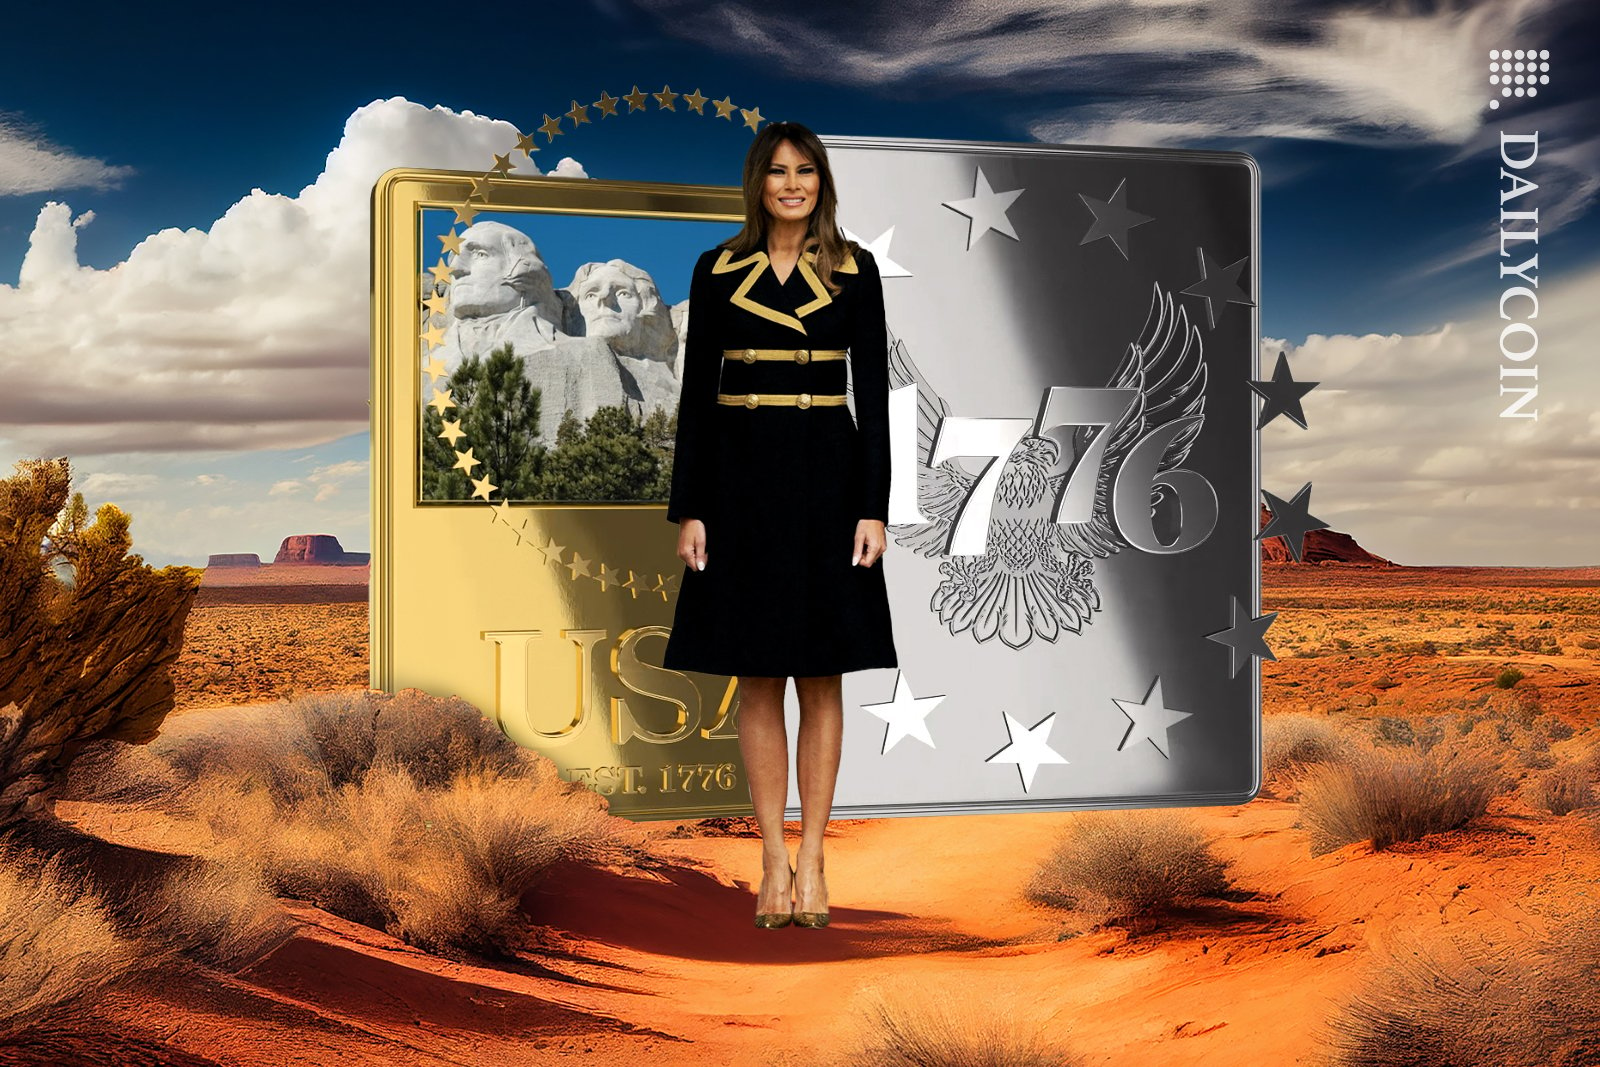 Melania Trump showing off her 1776 NFT's in the American desert landscape.